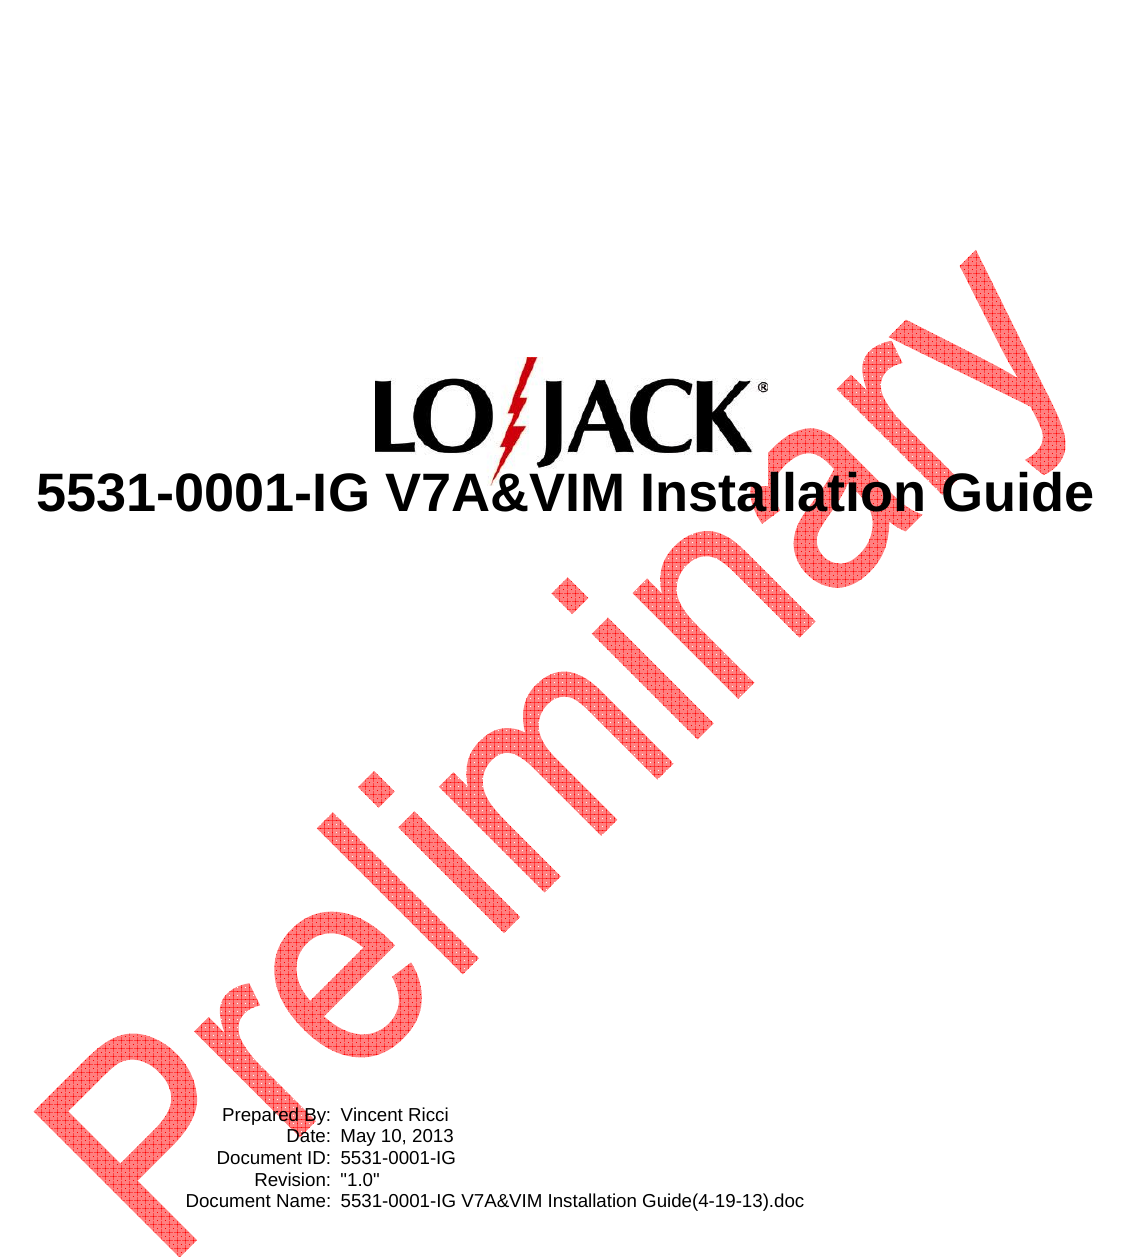             5531-0001-IG V7A&amp;VIM Installation Guide                  Prepared By:  Vincent Ricci   Date:  May 10, 2013  Document ID: 5531-0001-IG  Revision: &quot;1.0&quot;   Document Name:  5531-0001-IG V7A&amp;VIM Installation Guide(4-19-13).doc   